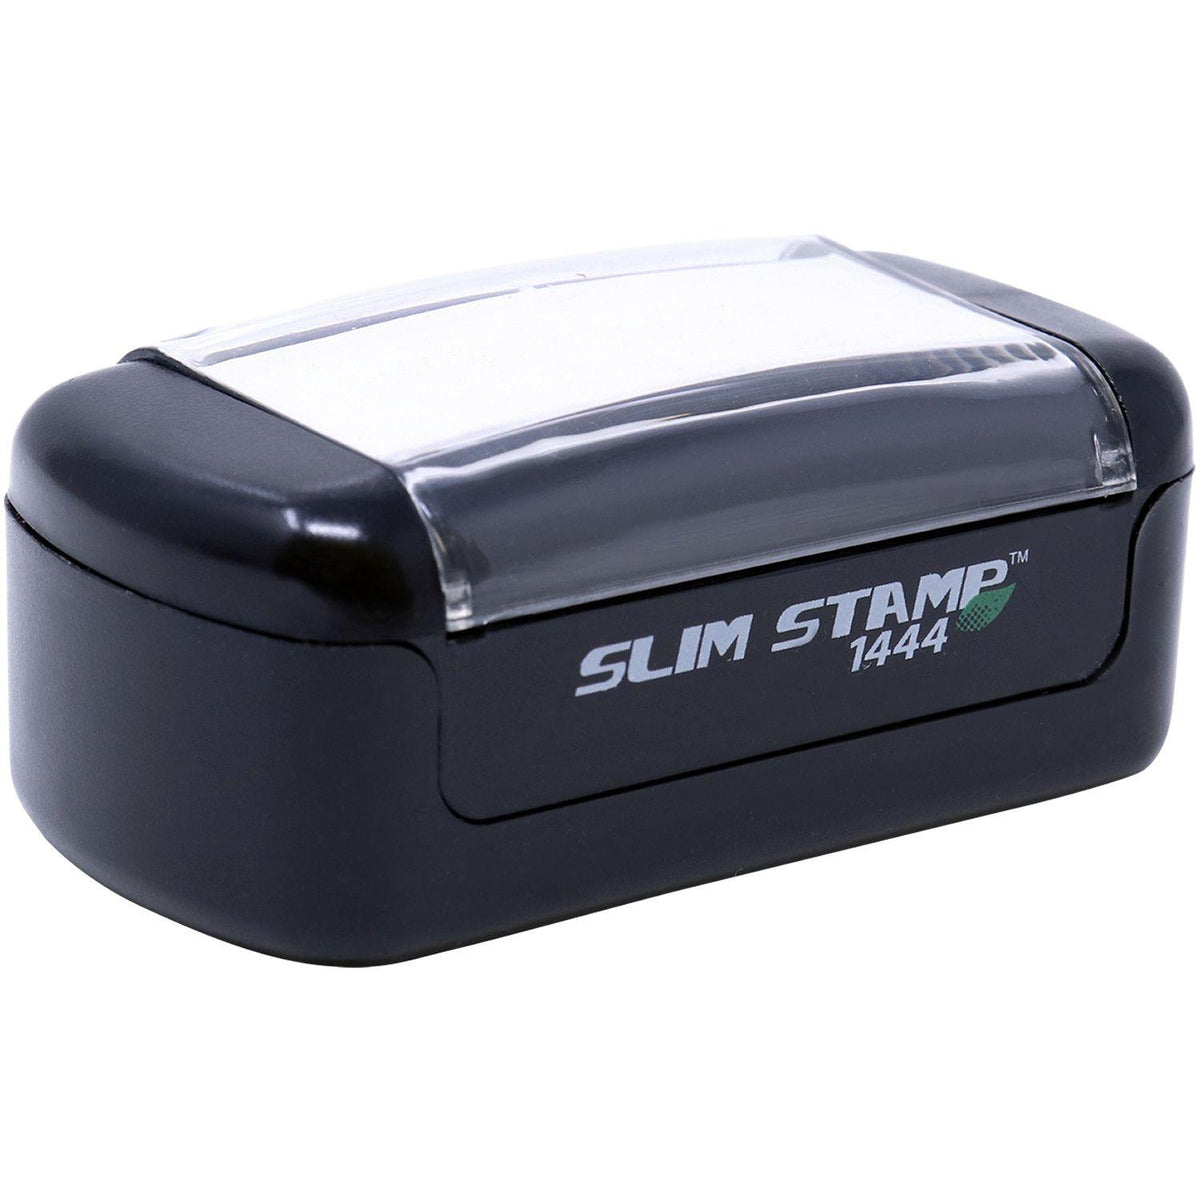 Alt View of Slim Pre Inked Personal Confidential Stamp Mount Angle